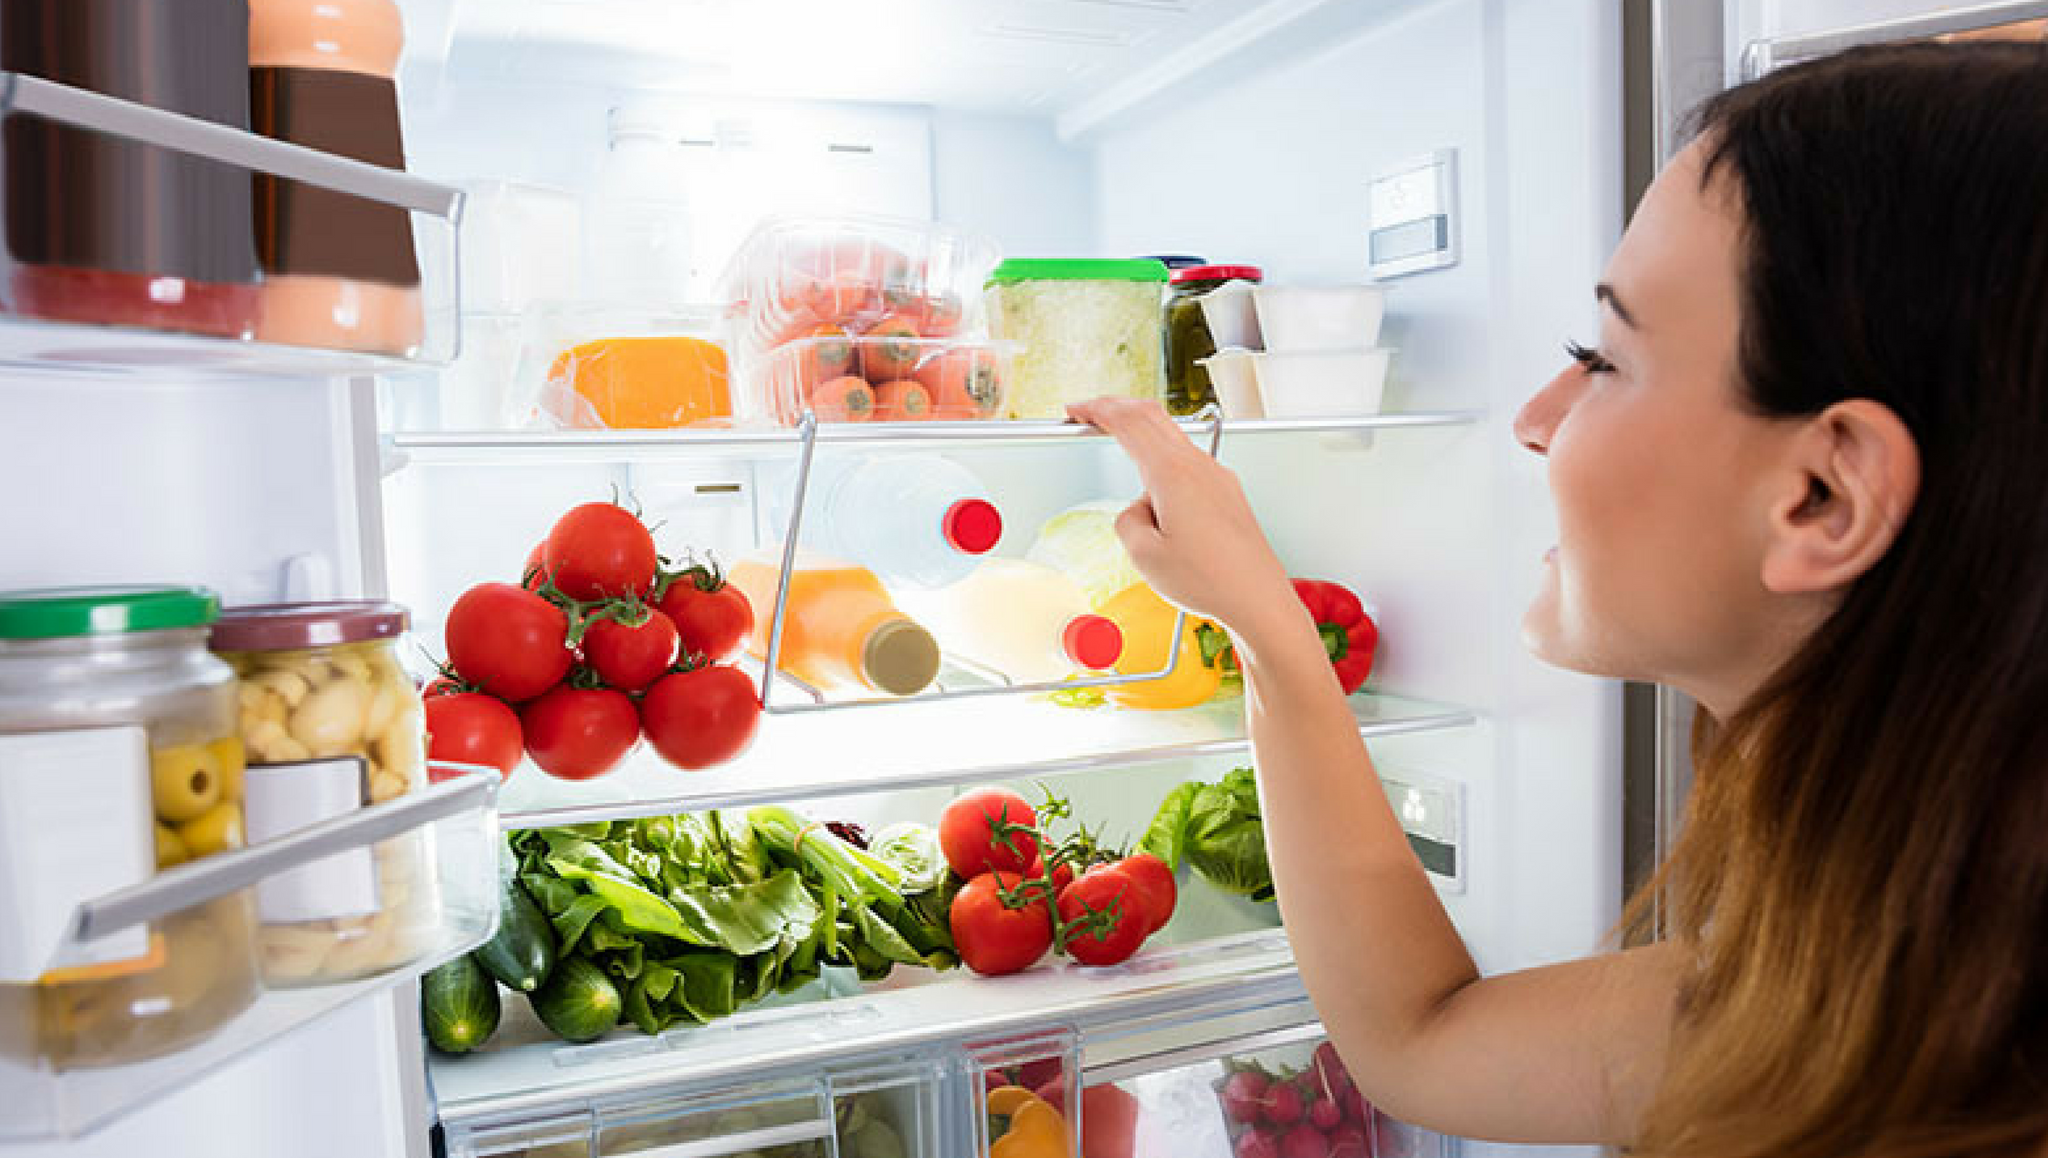 Food waste happens in the fridge, so use that space wisely!